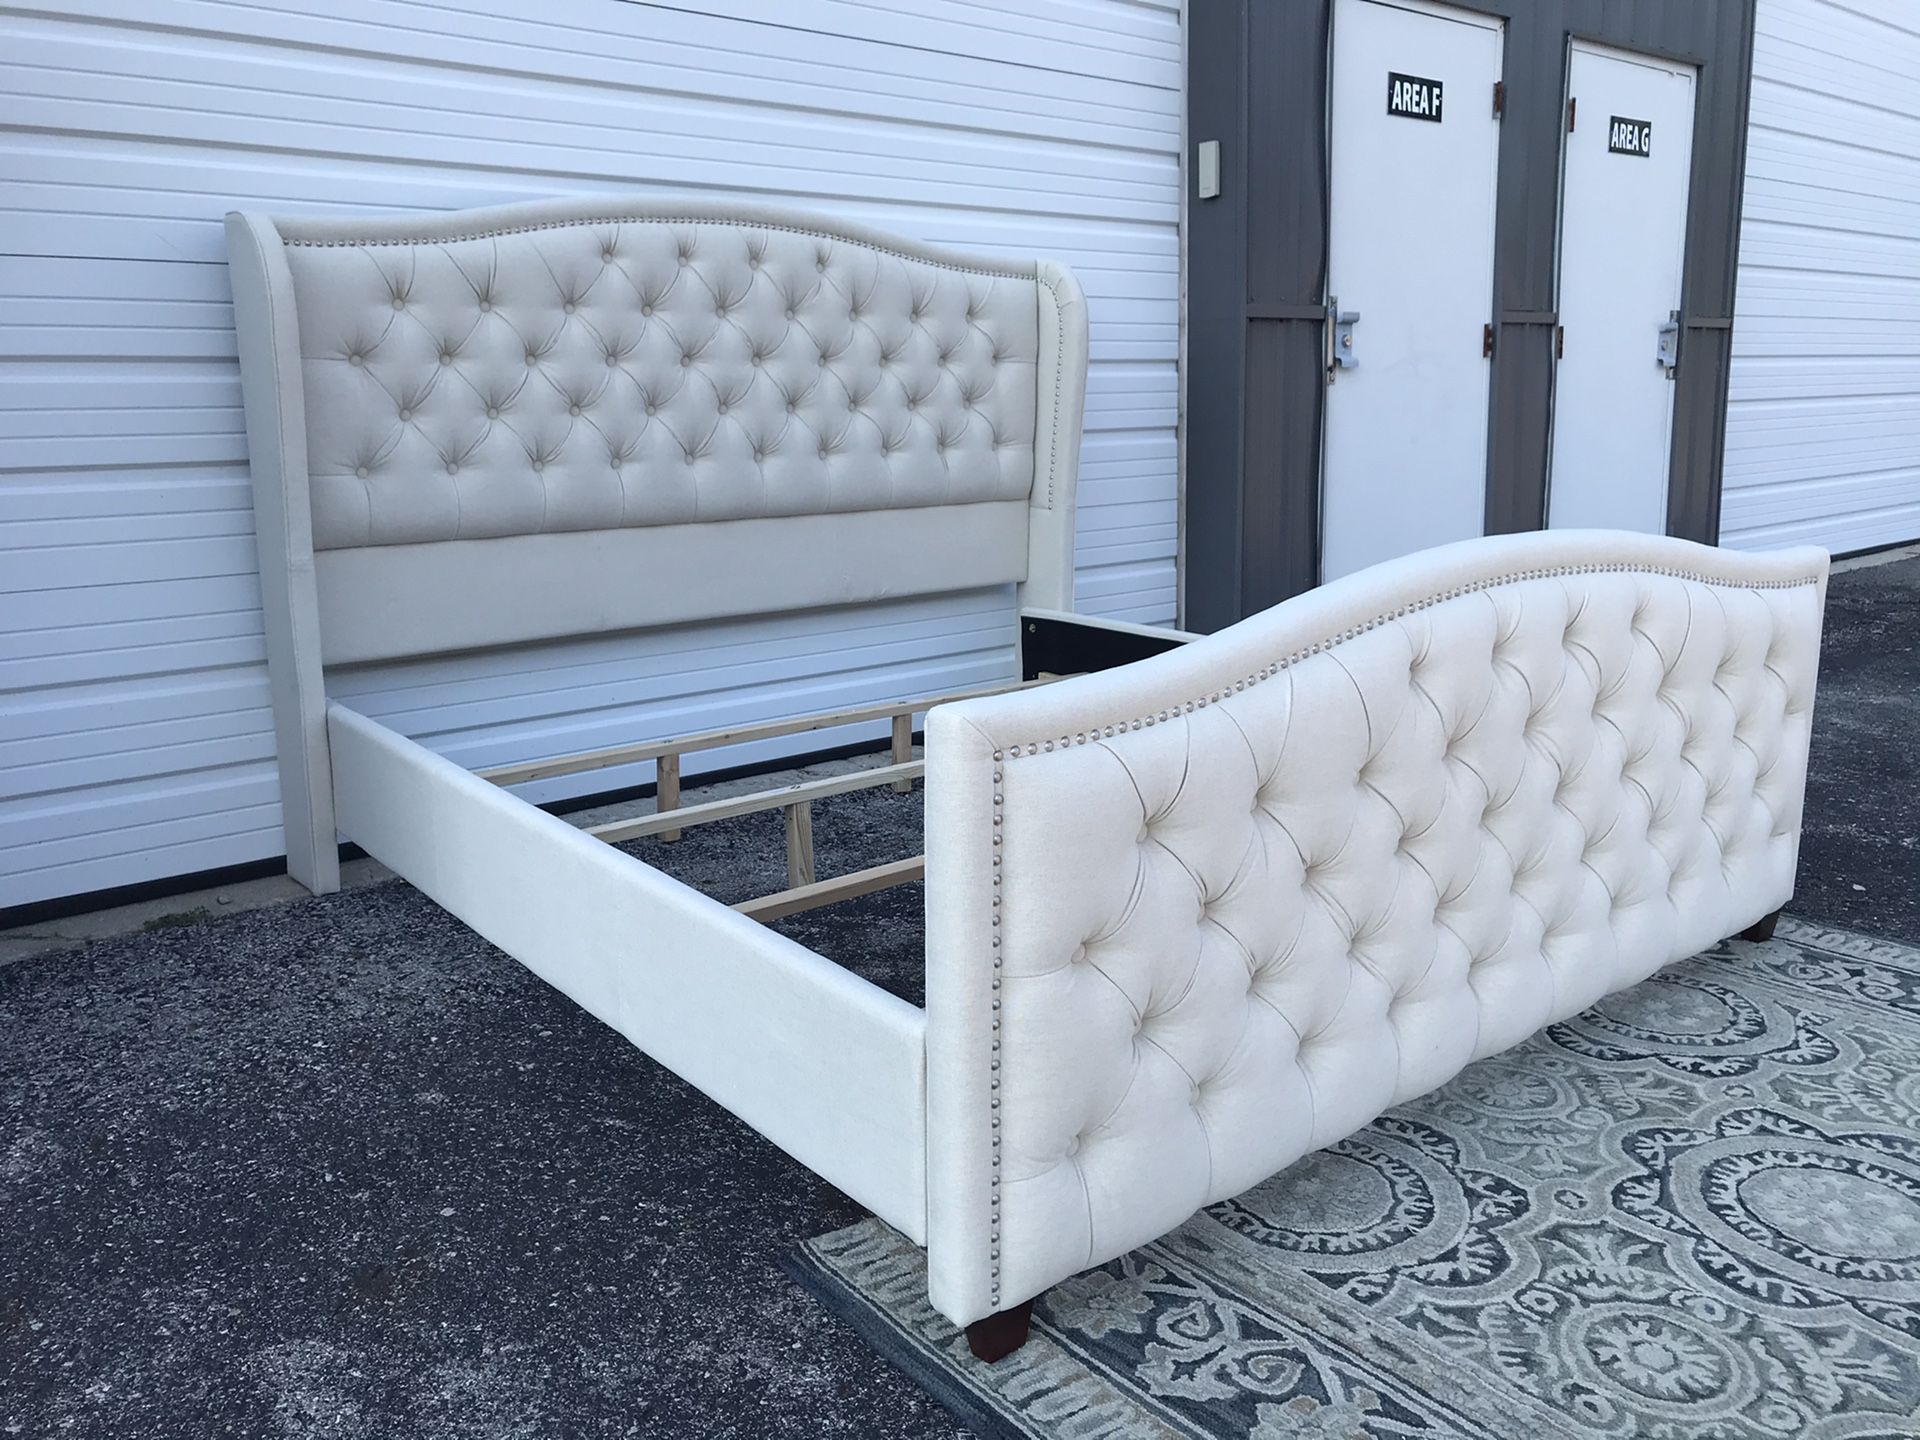 New Adorable king size bed frame with tufted wingback headboard and footboard